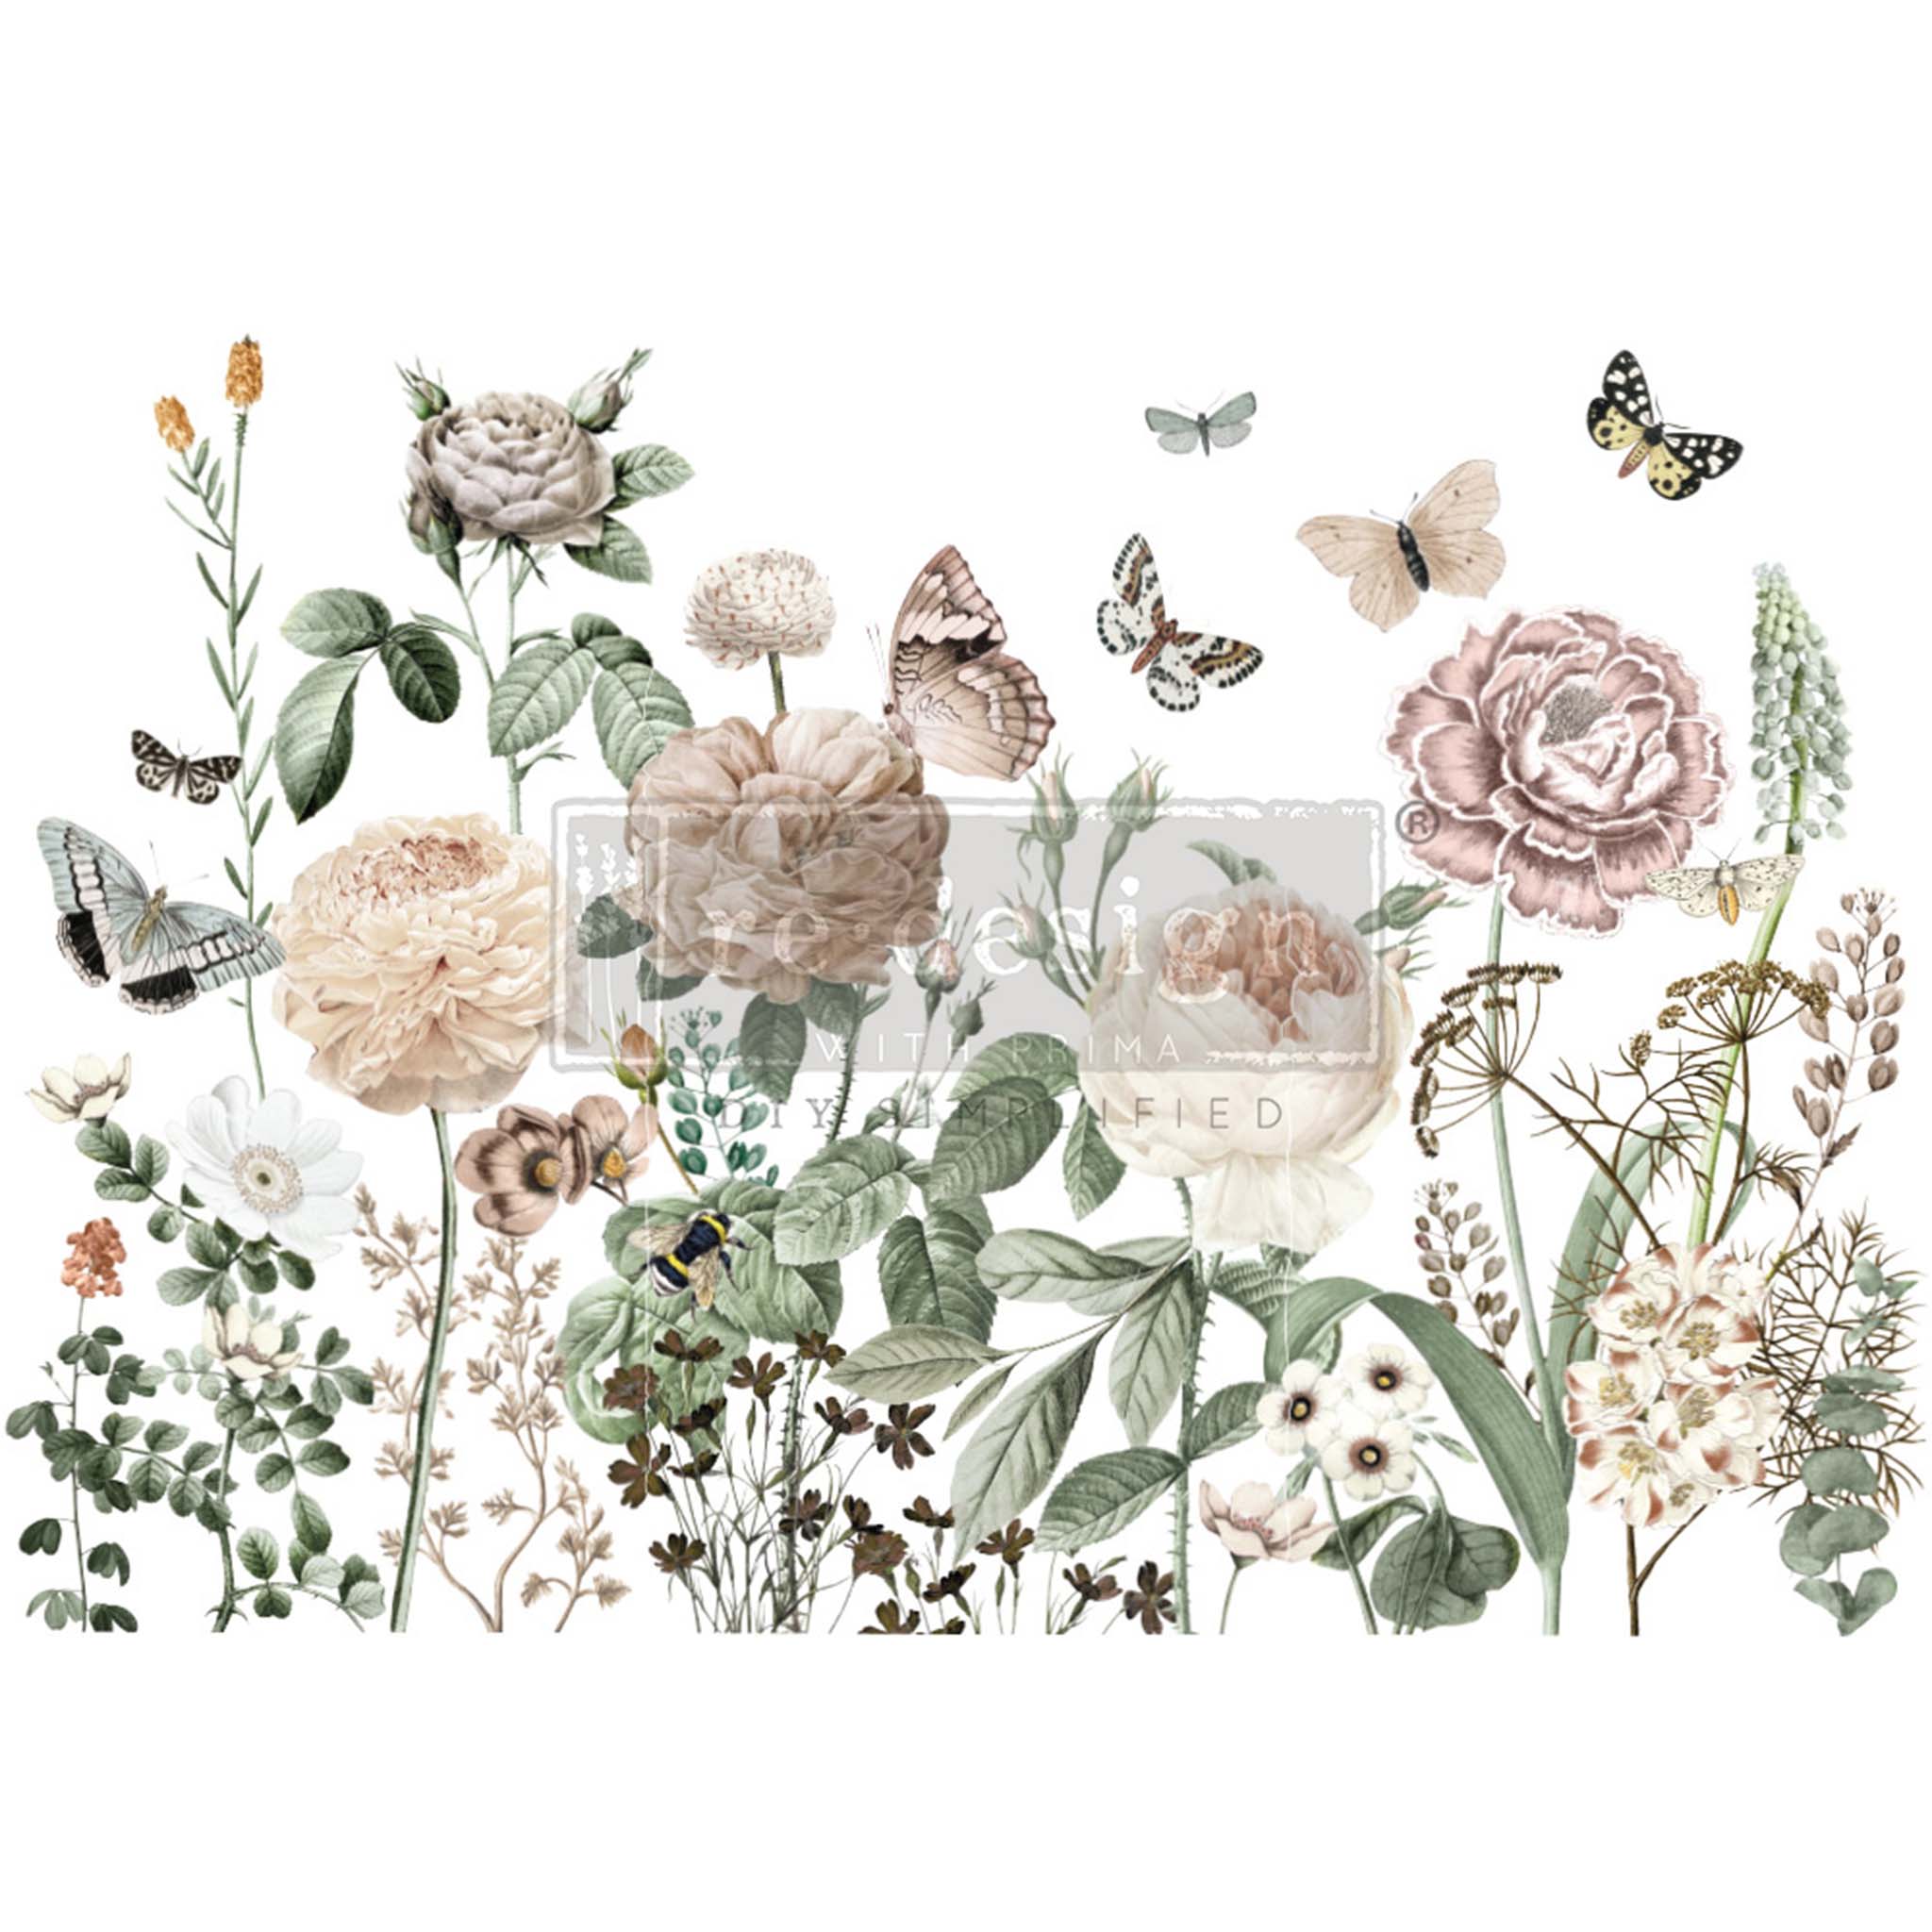 Rub-on transfer design of lightly colored wildflowers and butterflies.